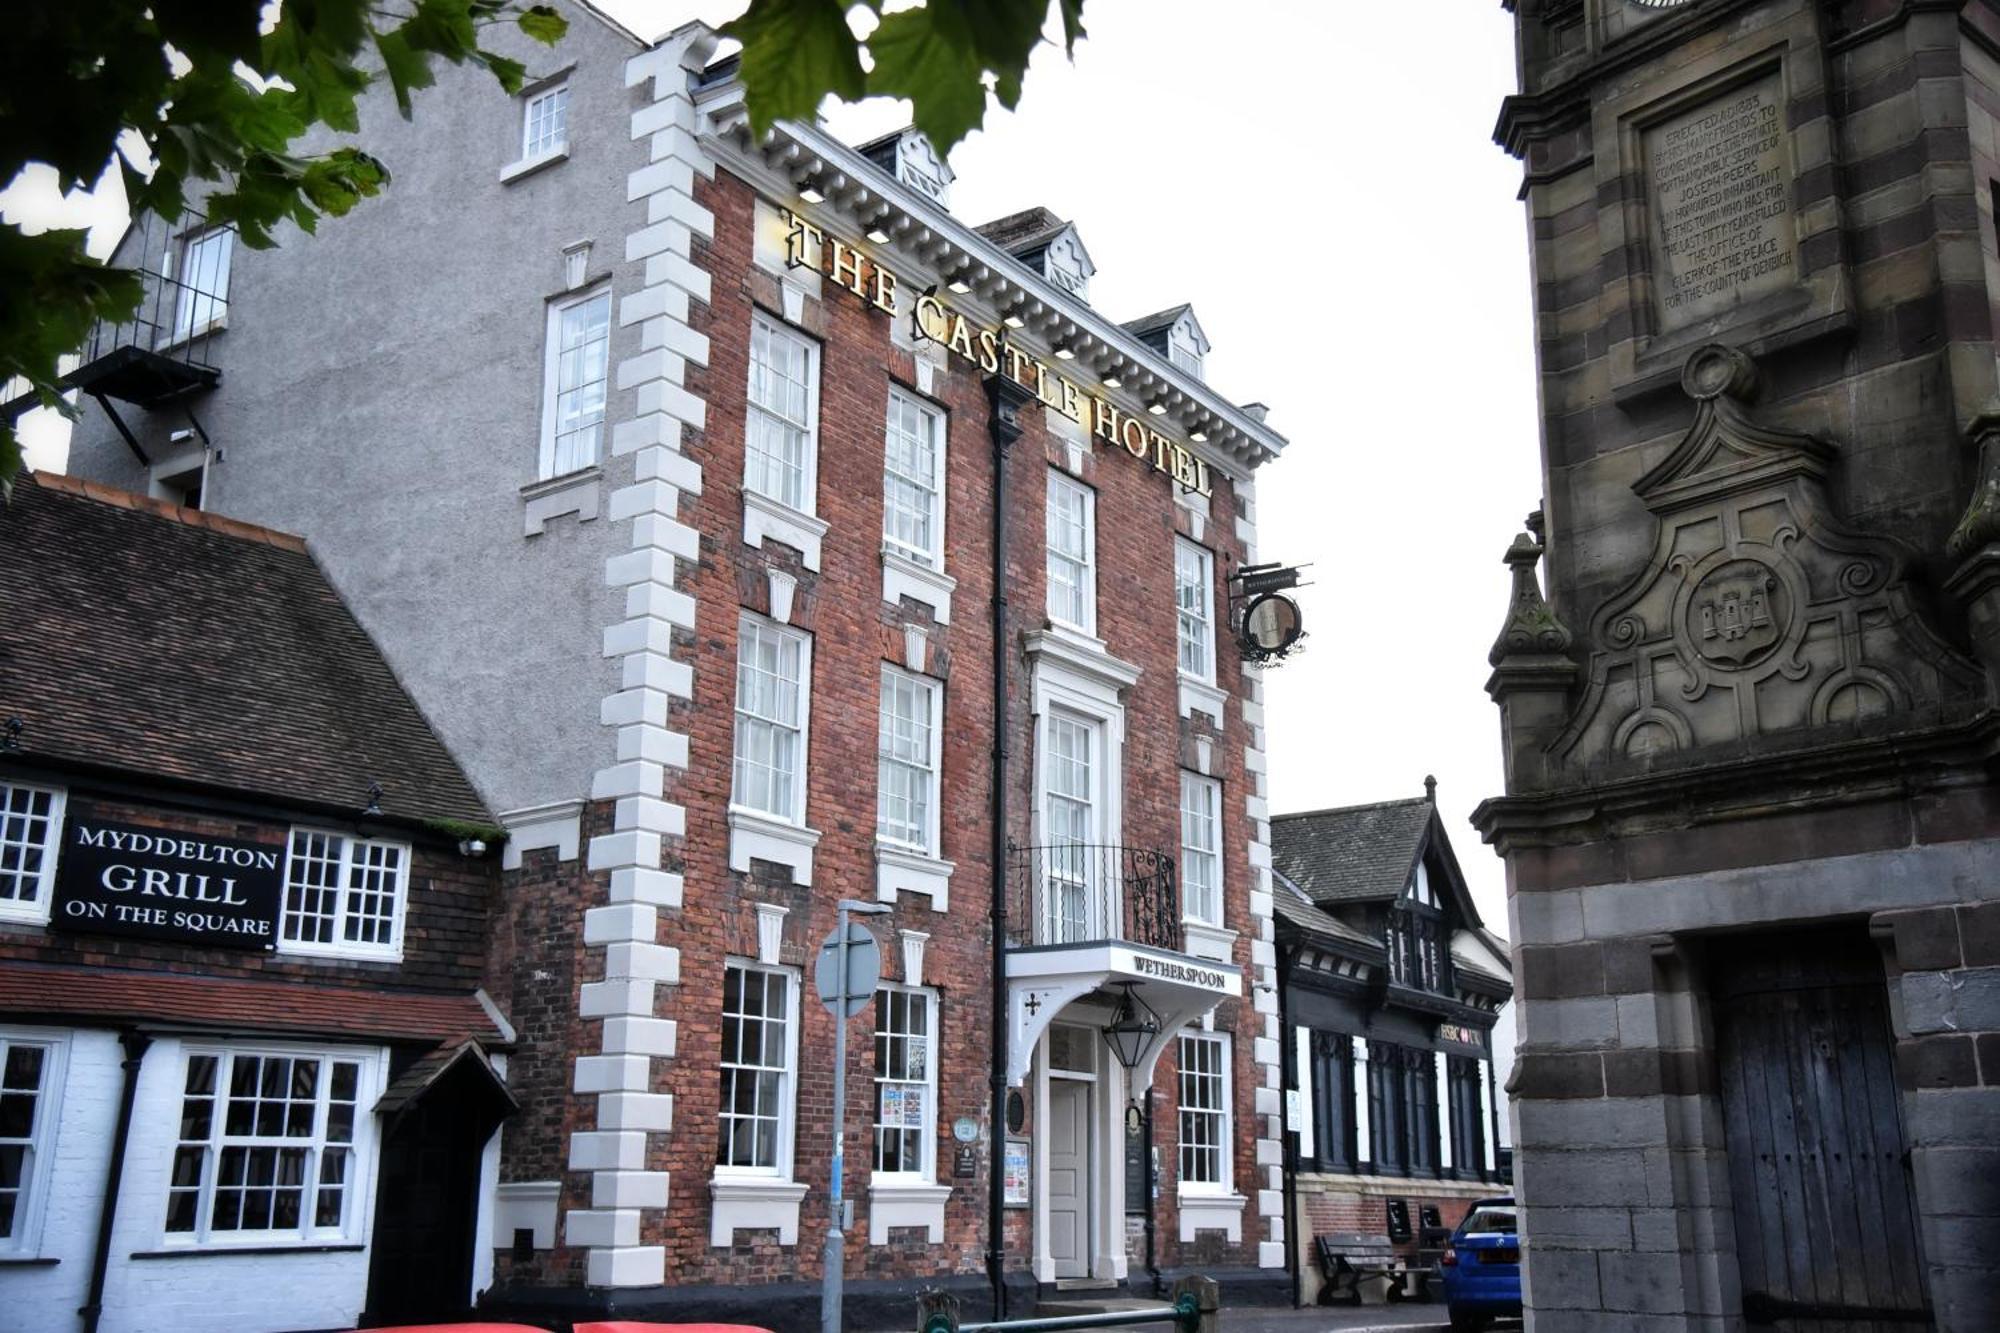 The Castle Hotel Wetherspoon Ruthin Exterior photo